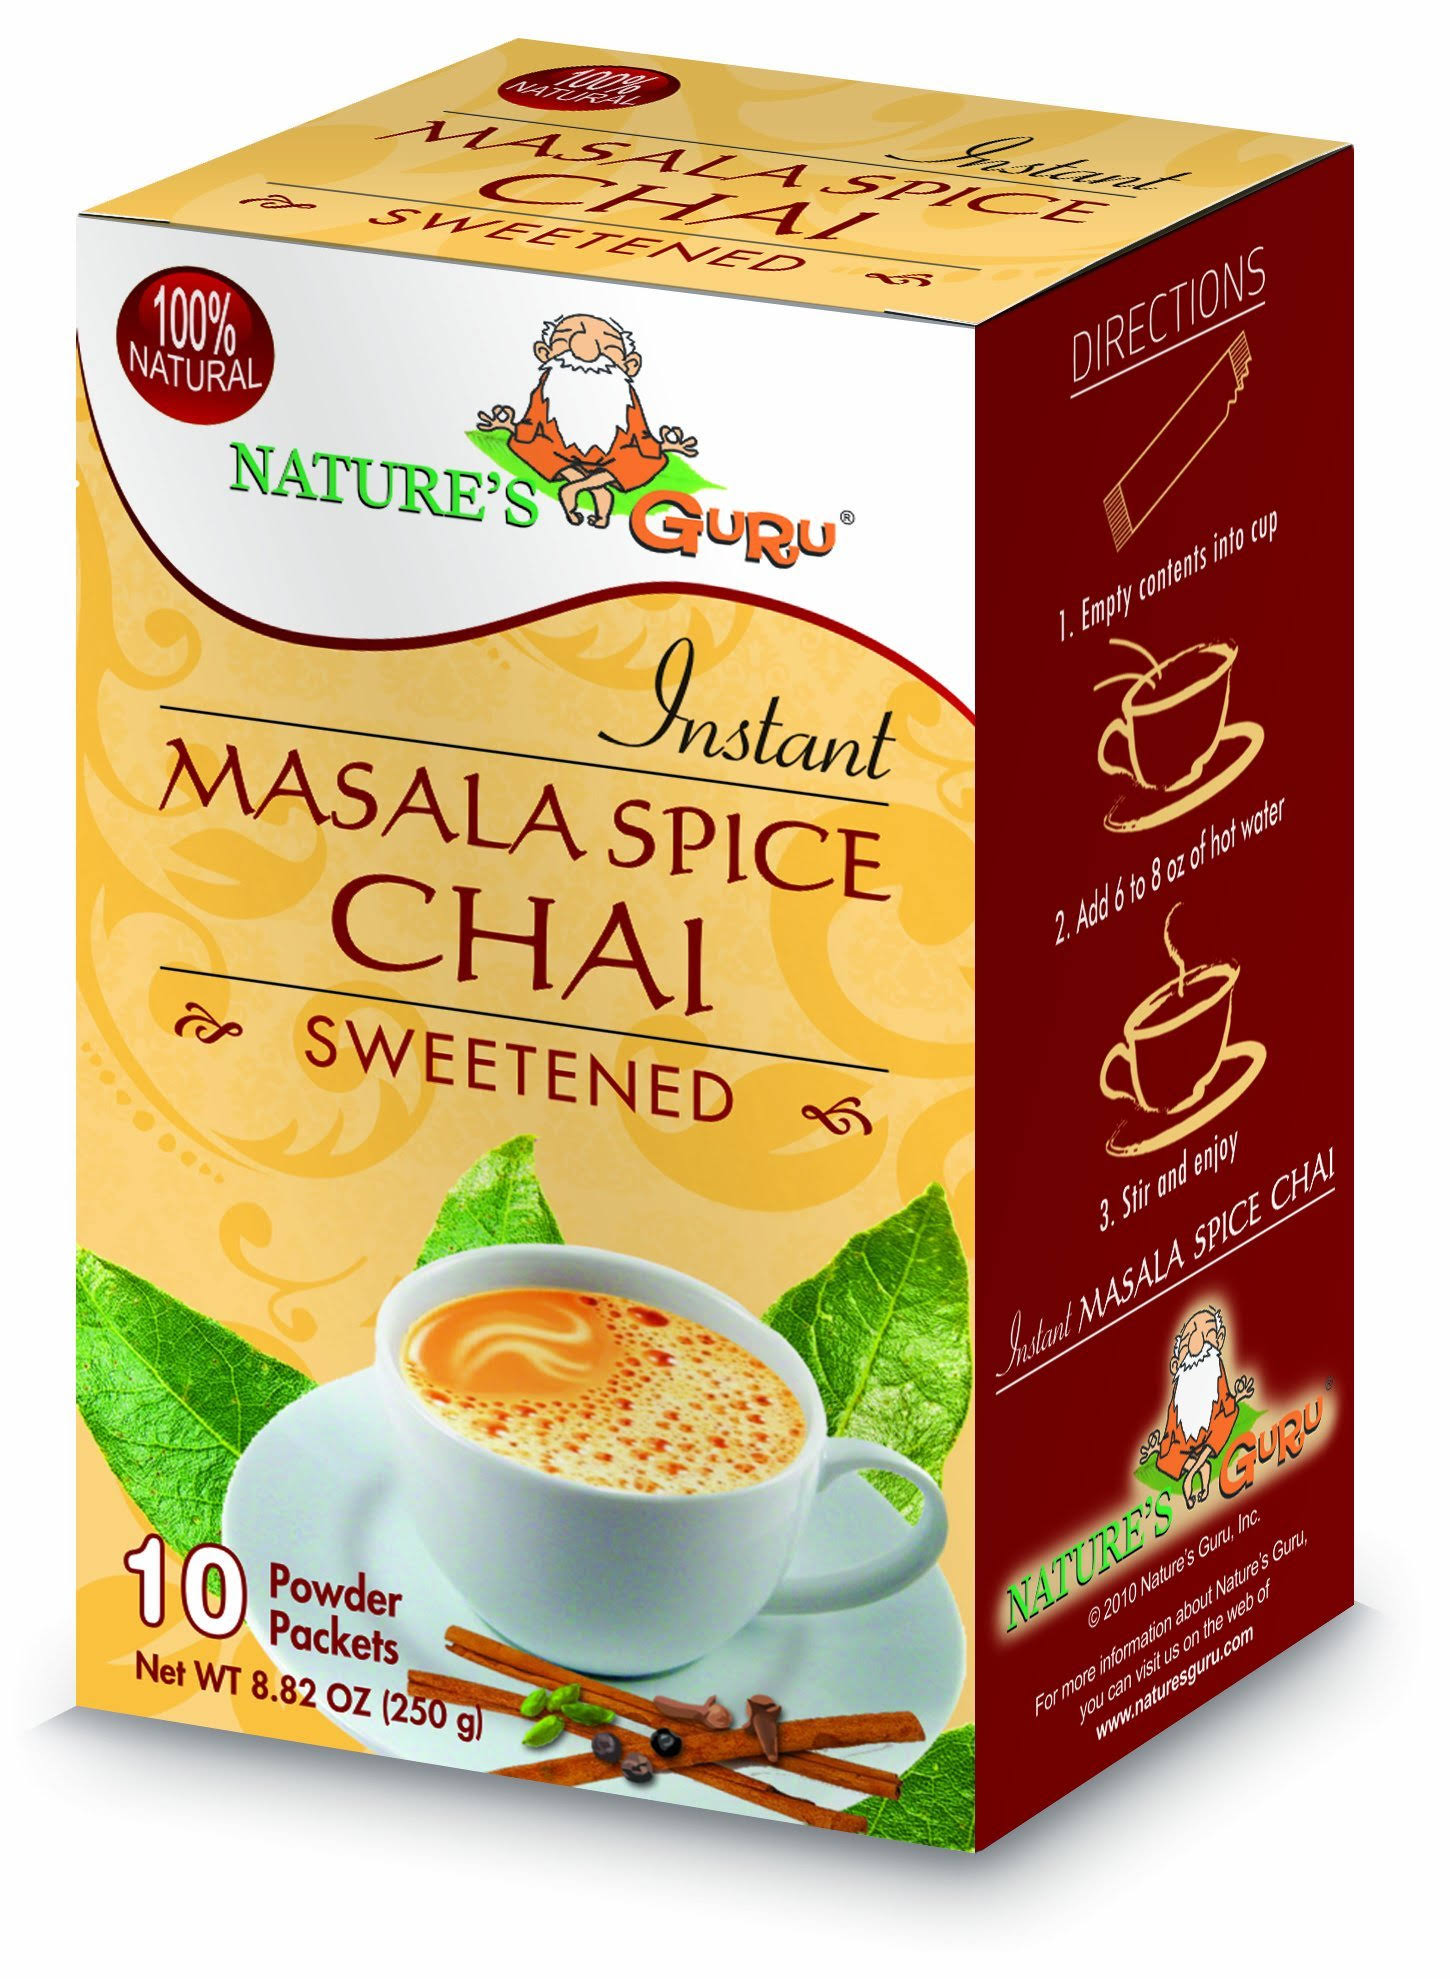 Nature's Guru Instant Masala Spice Chai Tea Drink Mix Sweetened Single Serve On-the-Go Drink Packets, 10 Count (Pack of 4)